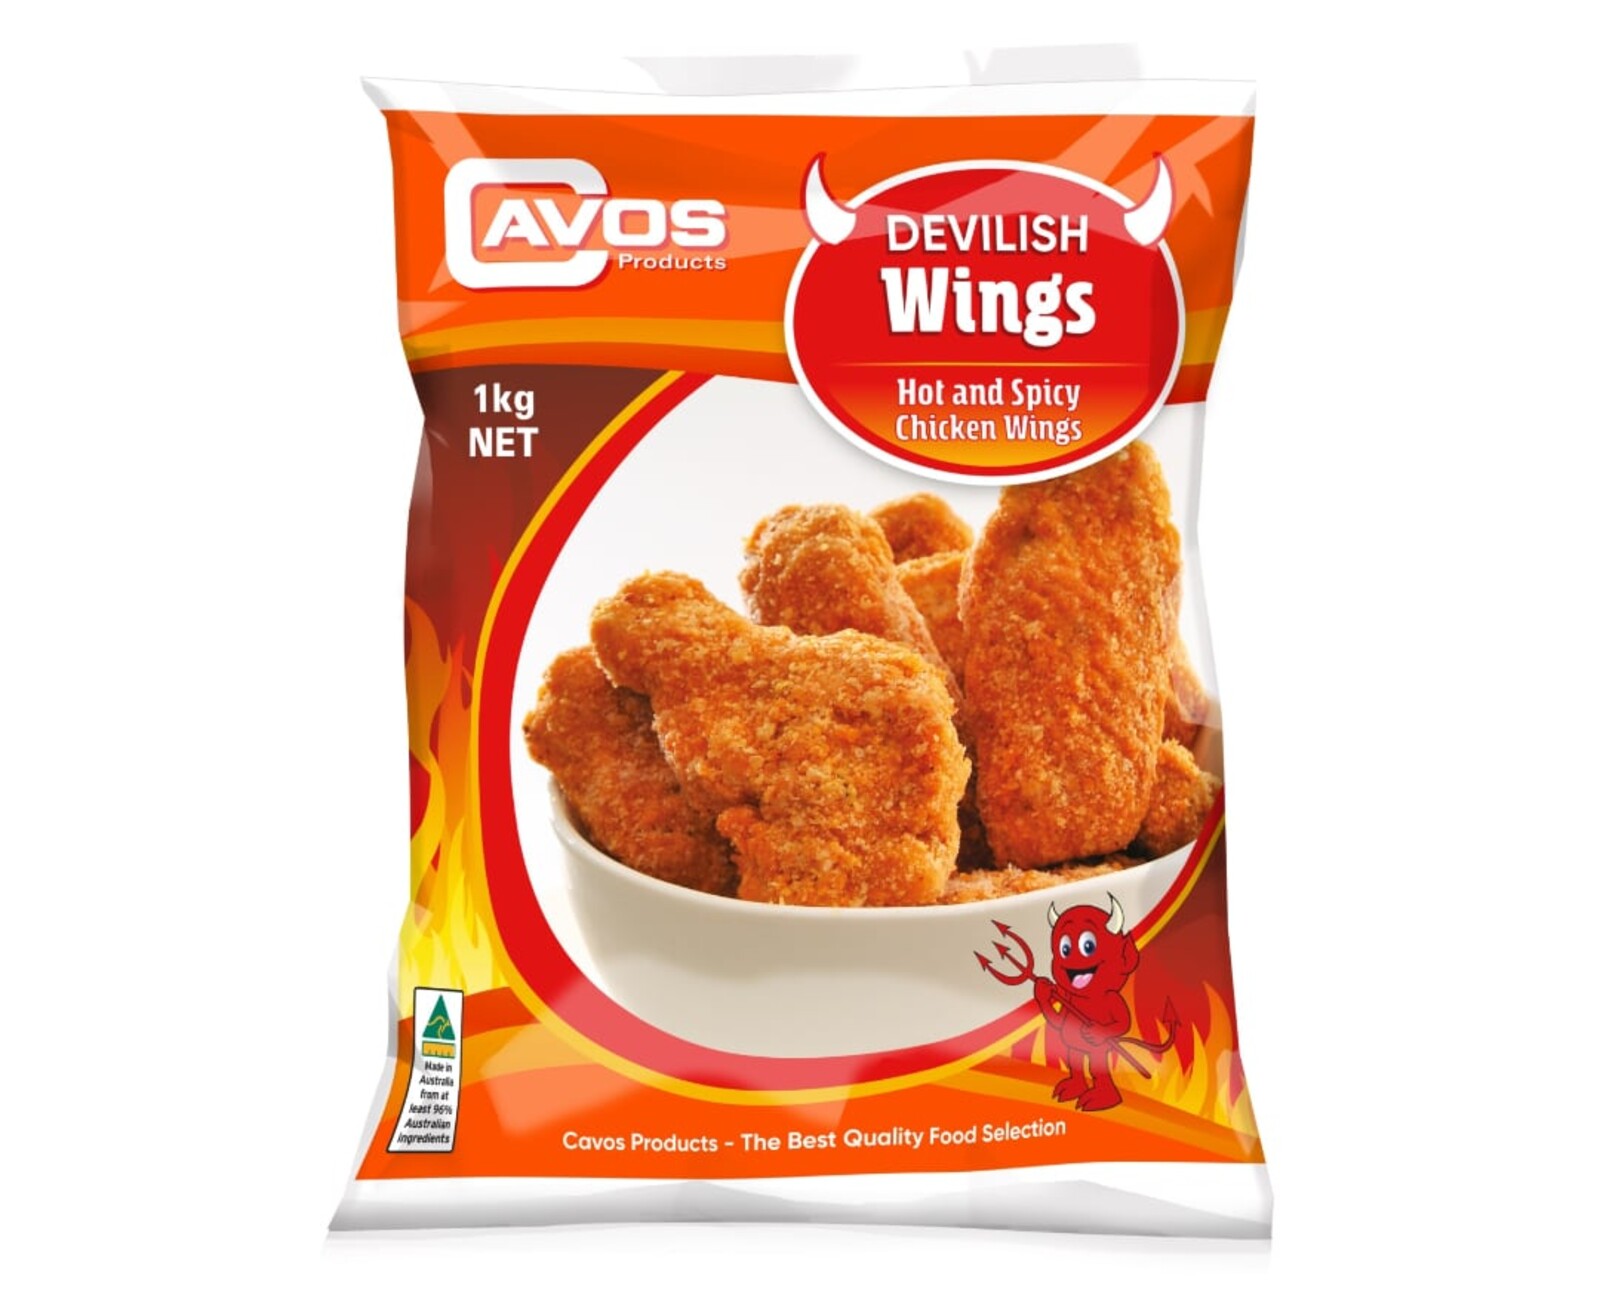 Cavos Products Devilish Wings